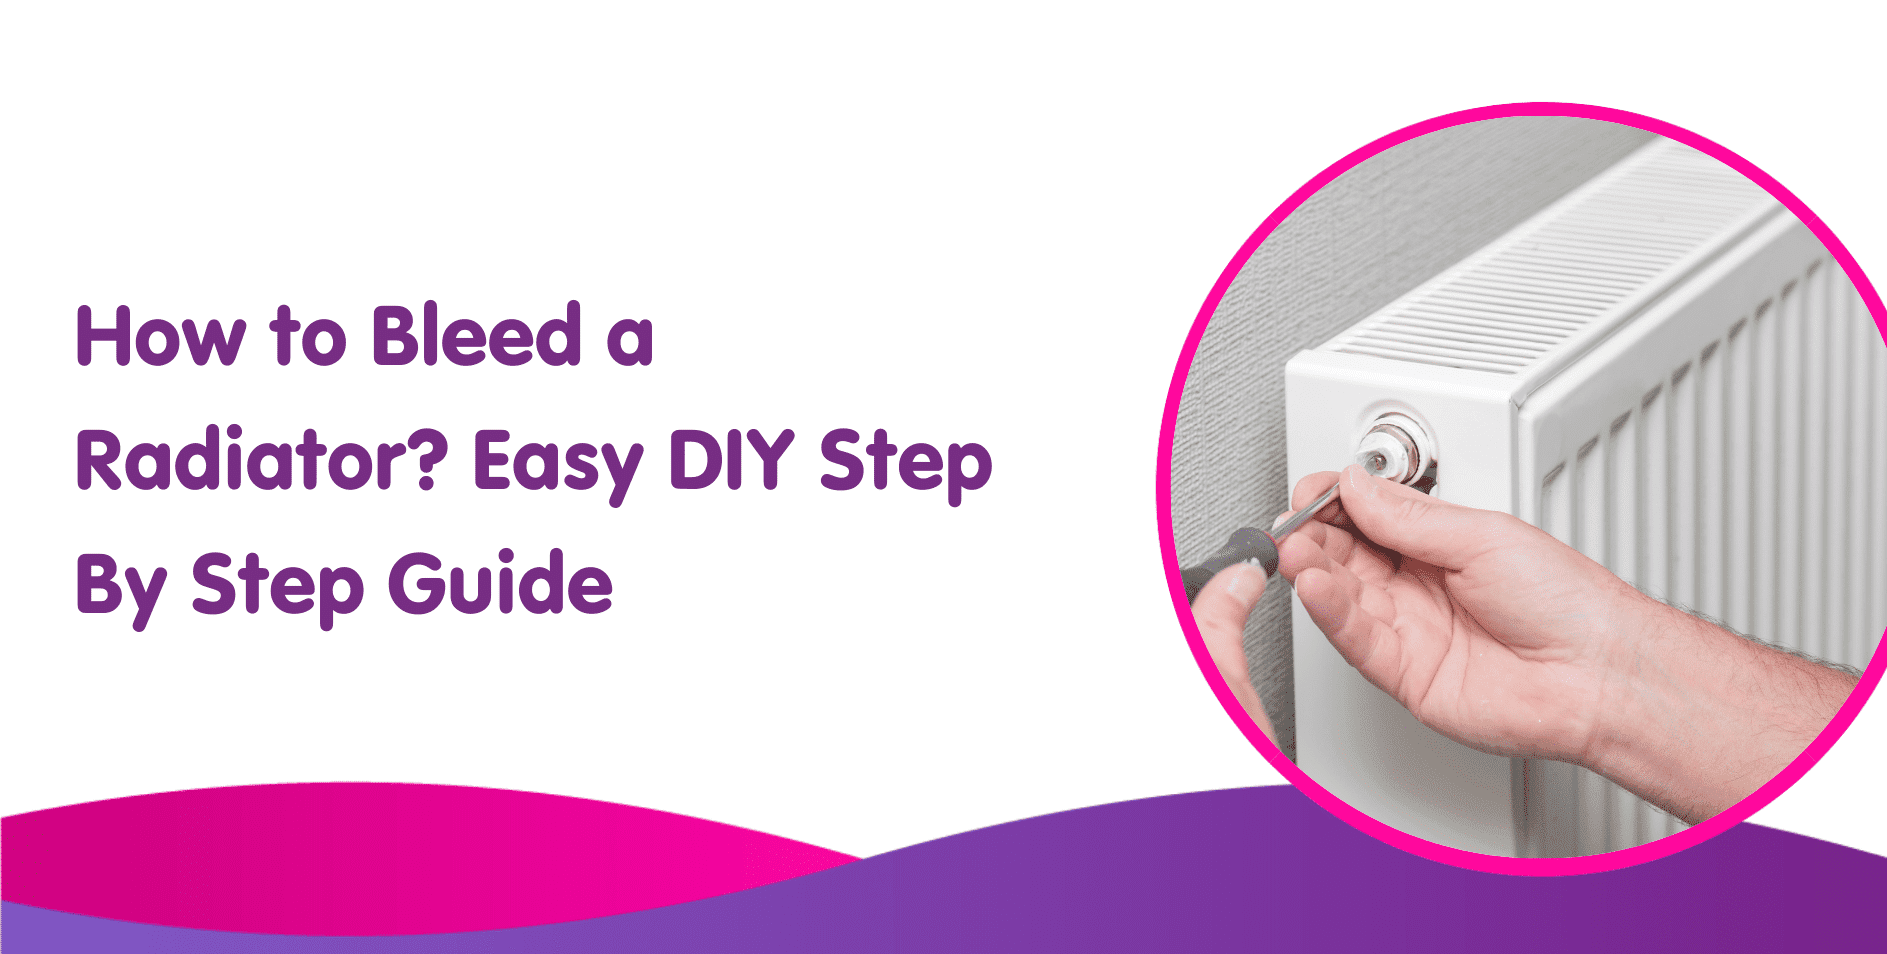 How to Bleed a Radiator? Easy DIY Step By Step Guide